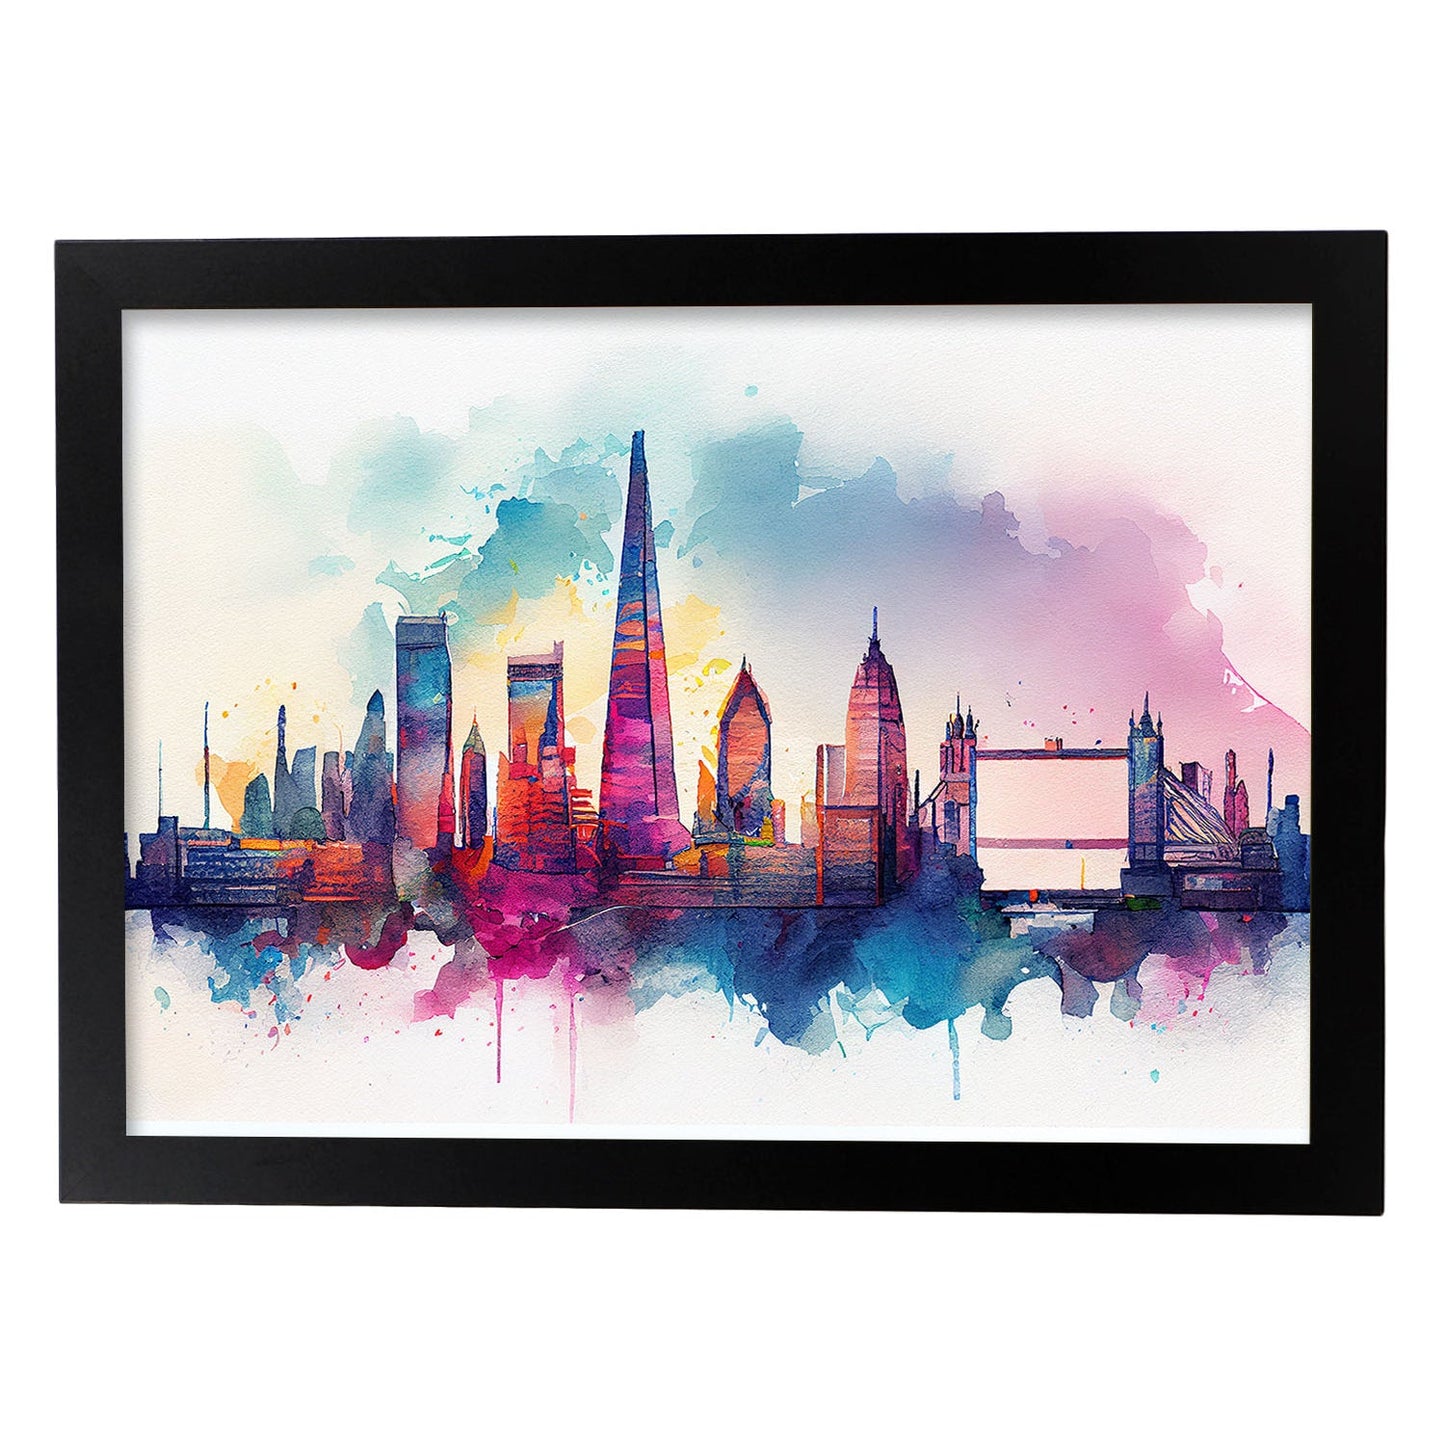 Nacnic watercolor of a skyline of the city of London_2. Aesthetic Wall Art Prints for Bedroom or Living Room Design.